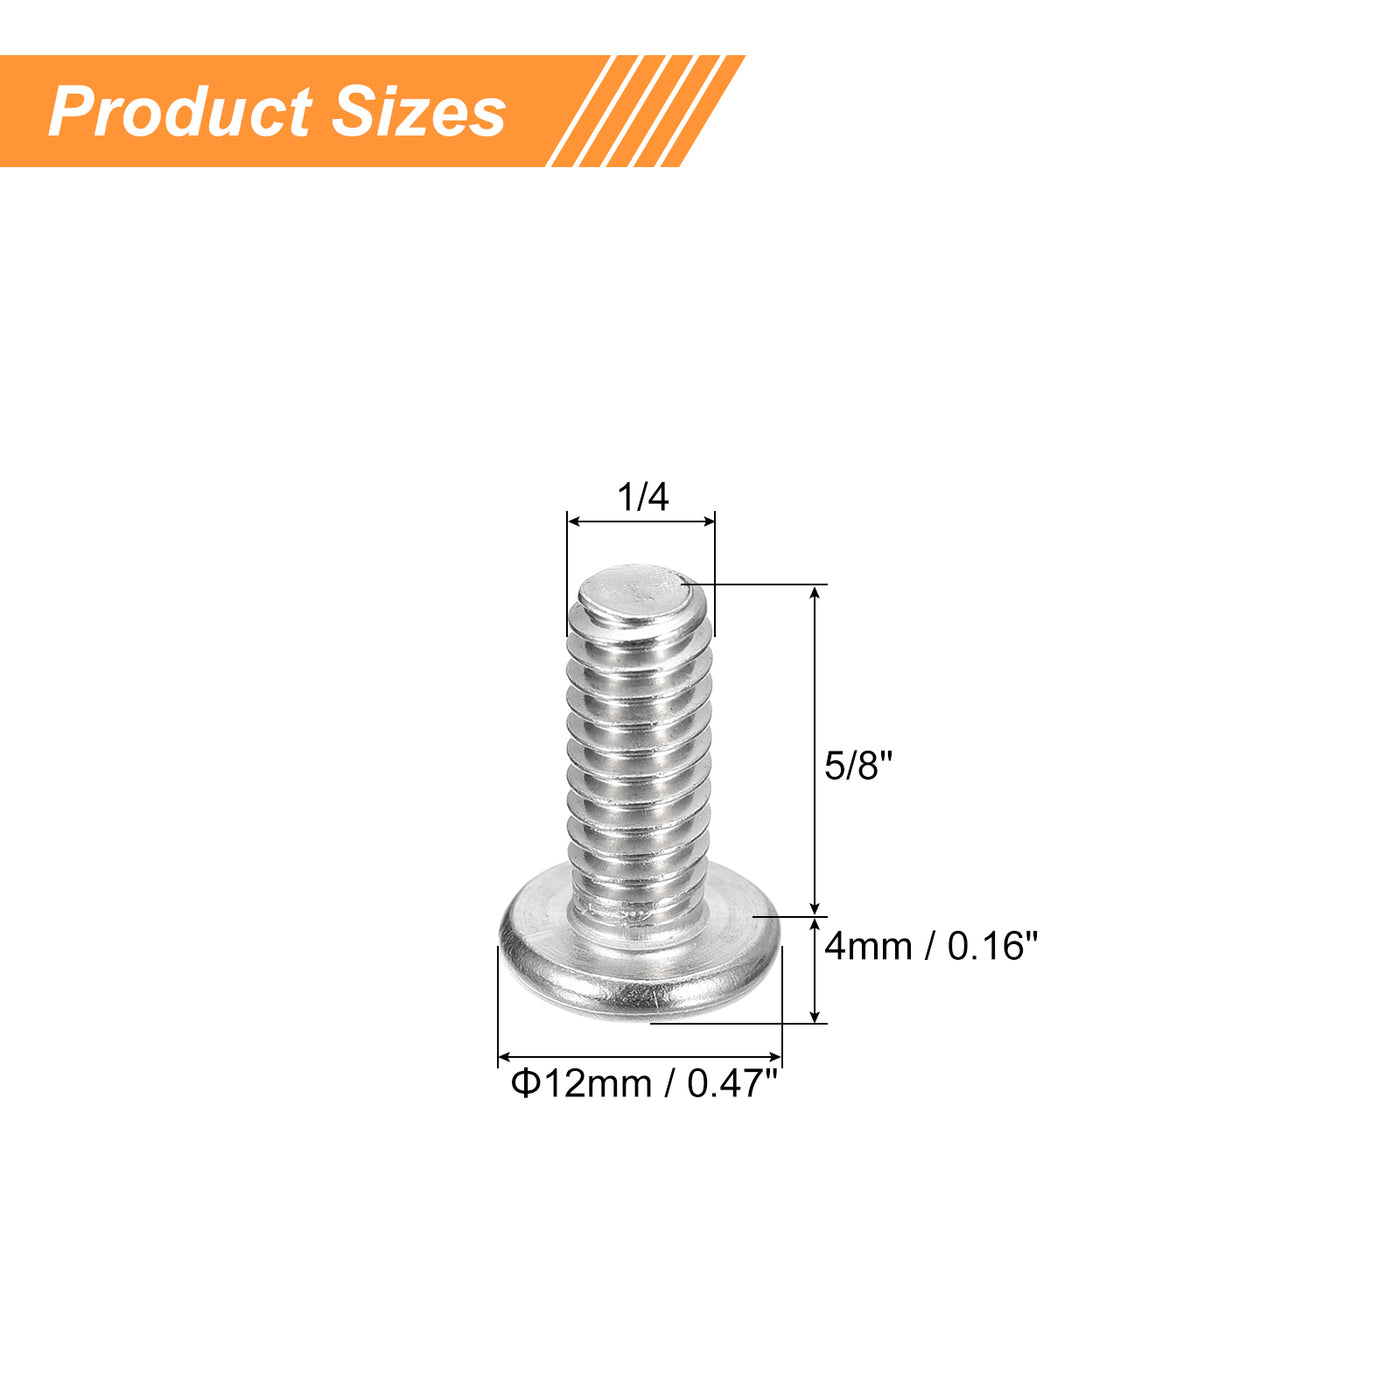 uxcell Uxcell 1/4-20x5/8" Pan Head Machine Screws, Stainless Steel 18-8 Screw, Pack of 50